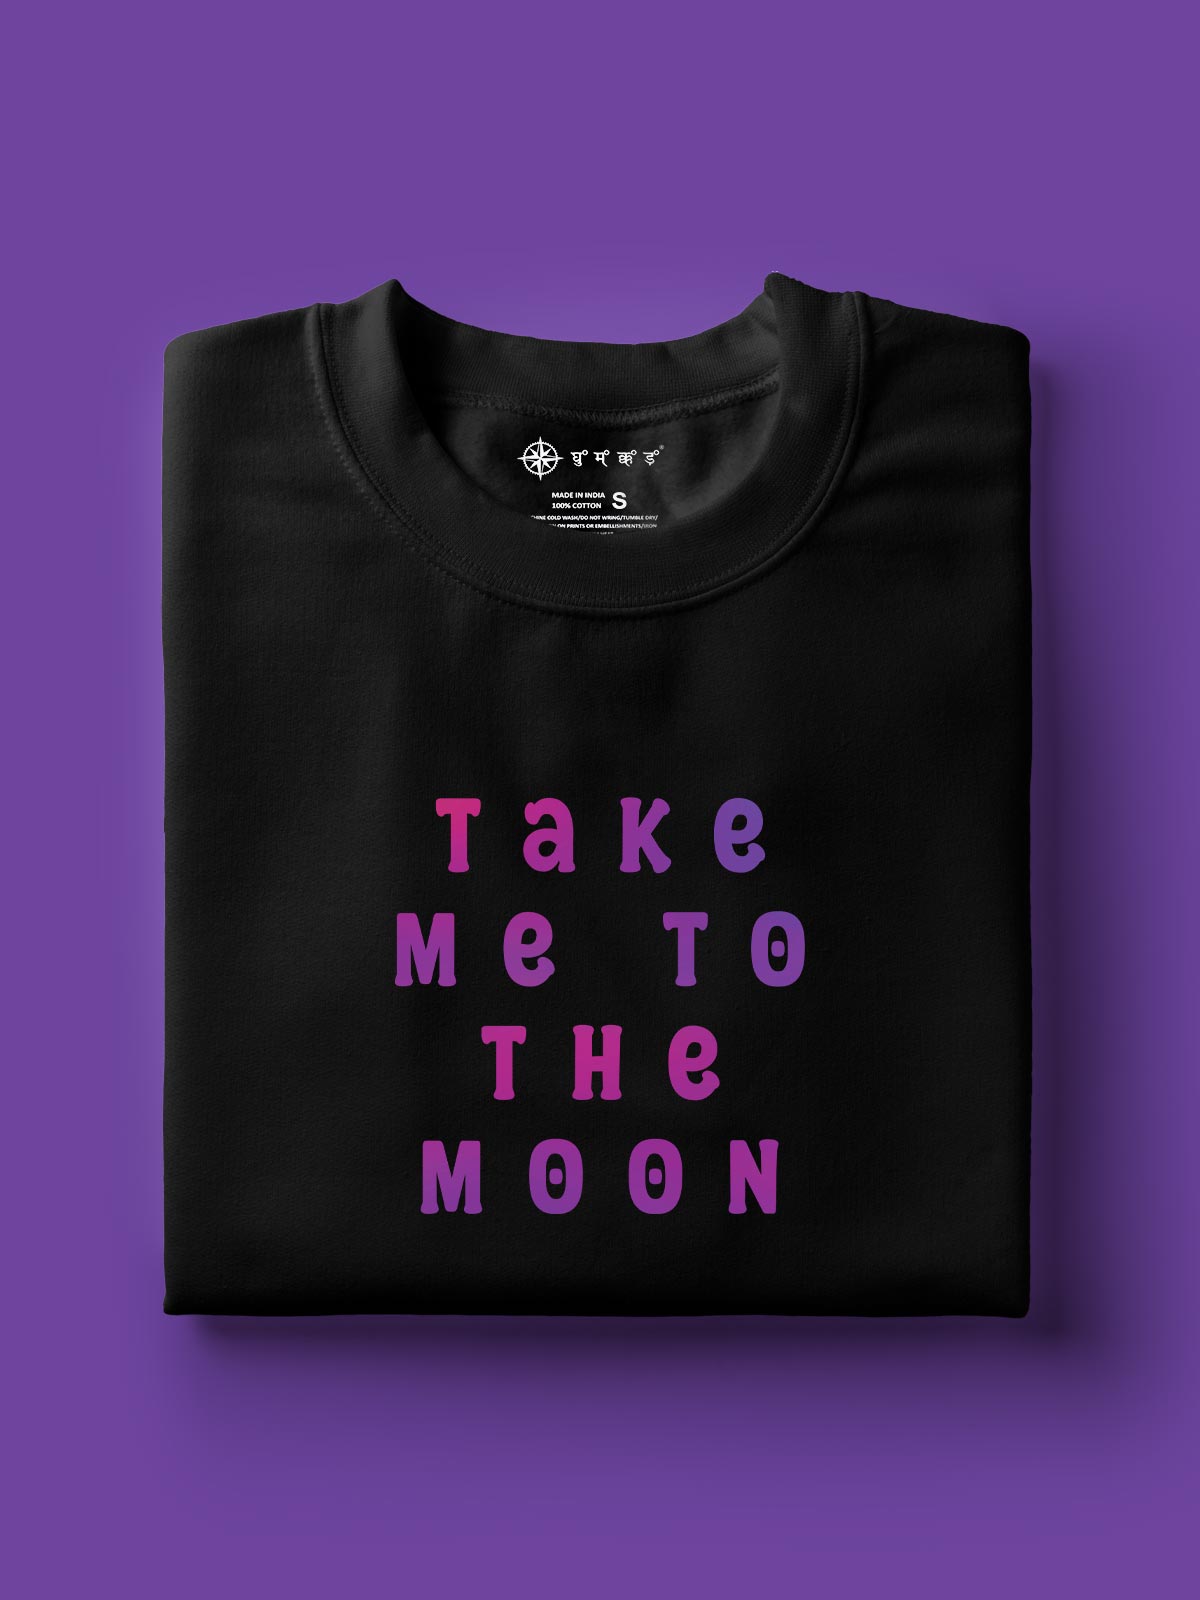 The-moon-party-backprint-t-shirt-for-men by Ghumakkad